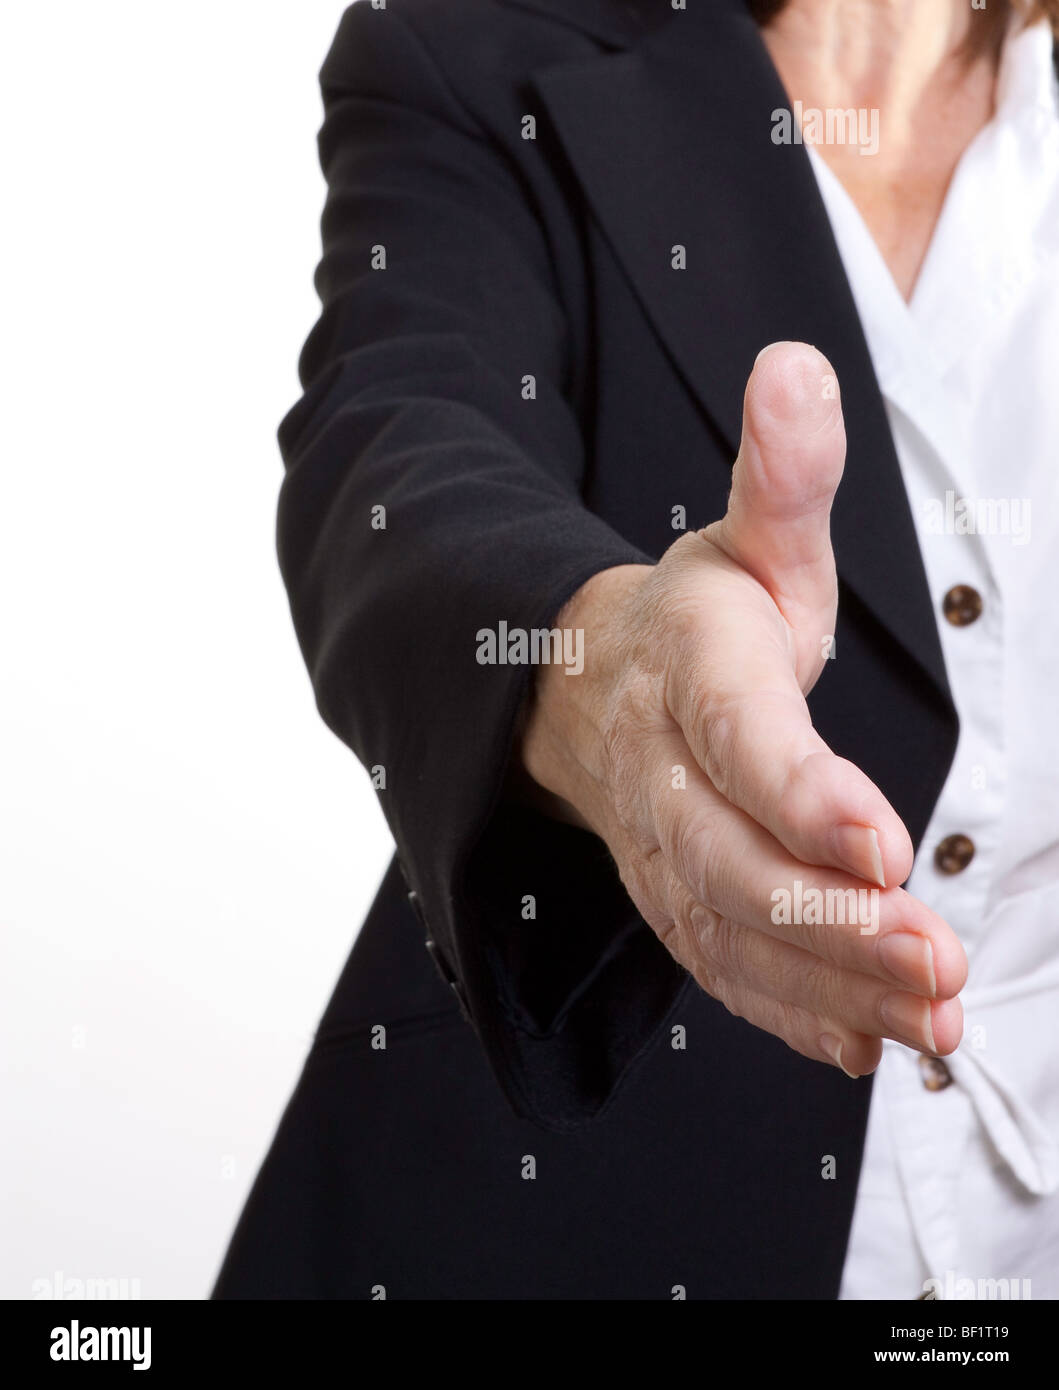 Older Senior Business Woman S Arthritic Hand With Knobbly Fingers In A Welcoming Hand Gesture